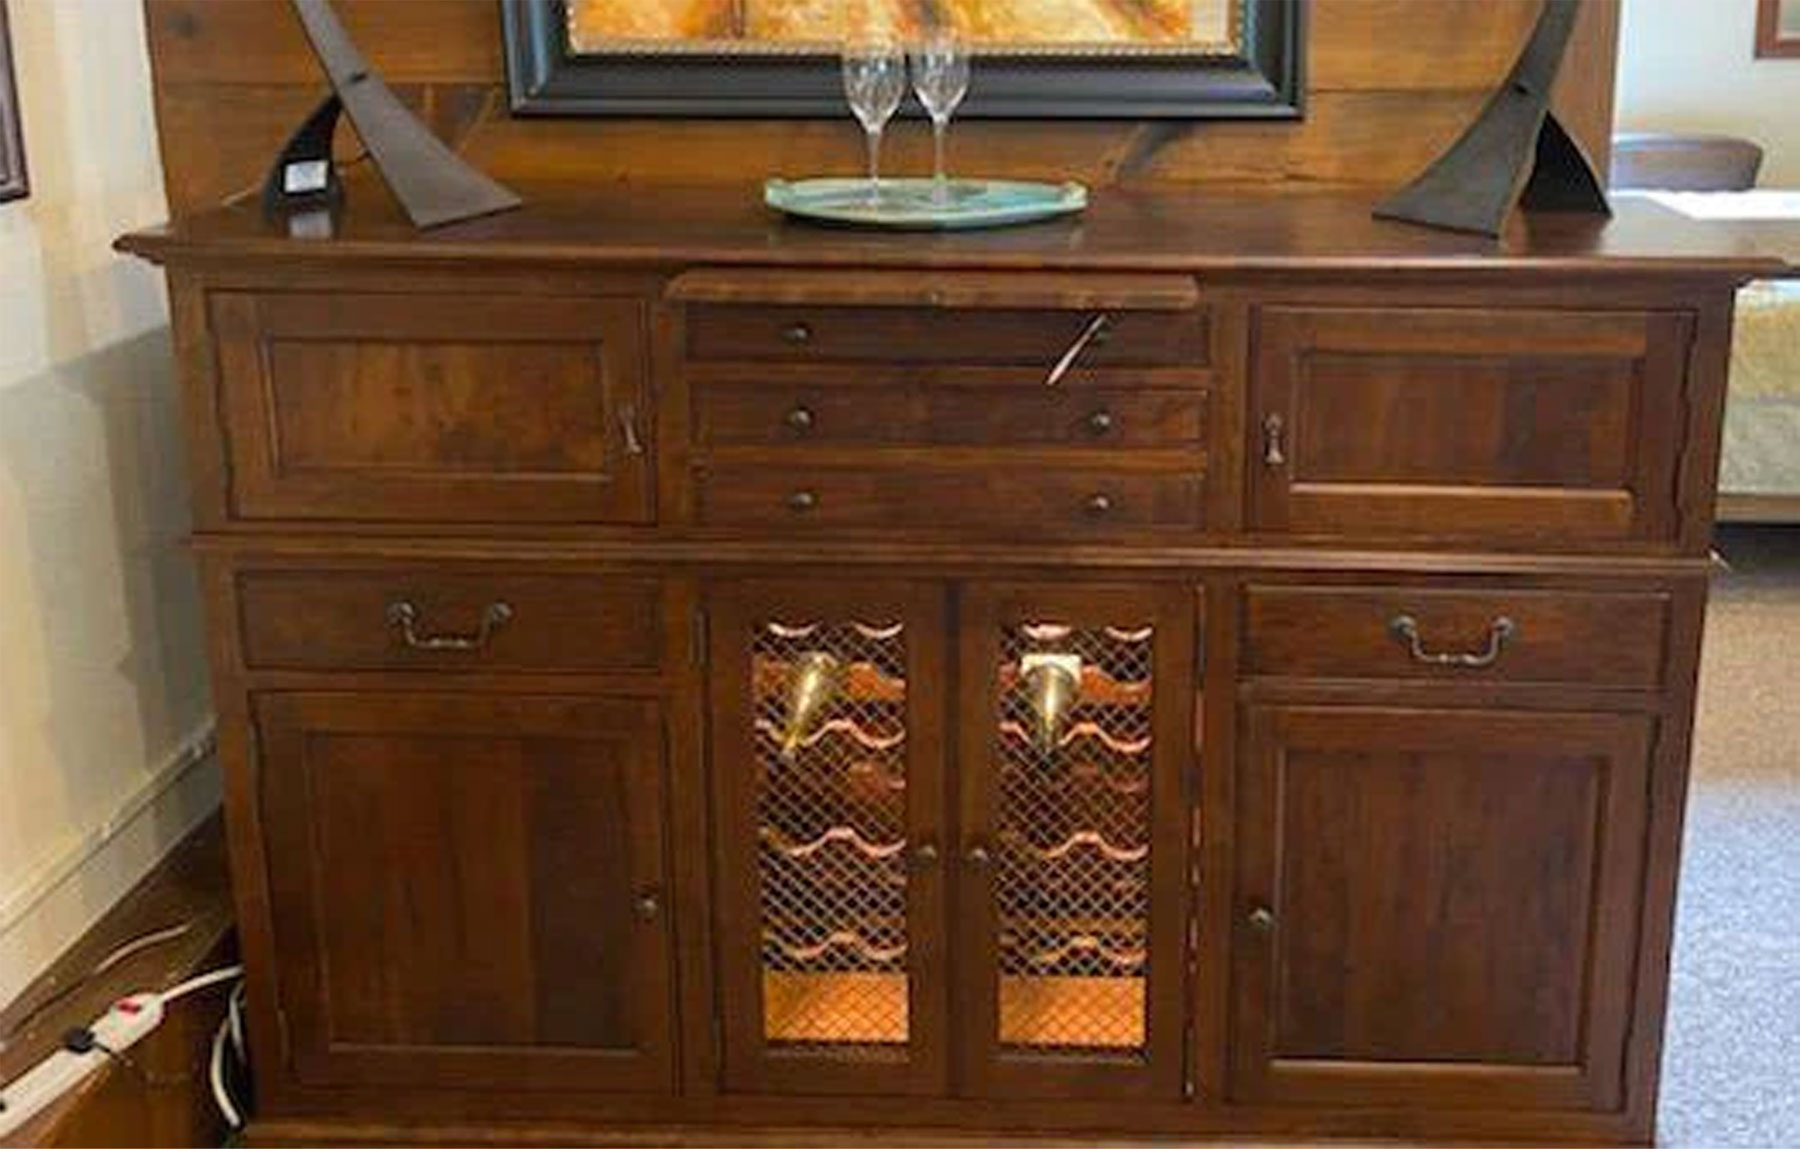 Mackenzie Dow Brighton Buffet with Seeded Glass Doors and Wine Rack in Cherry